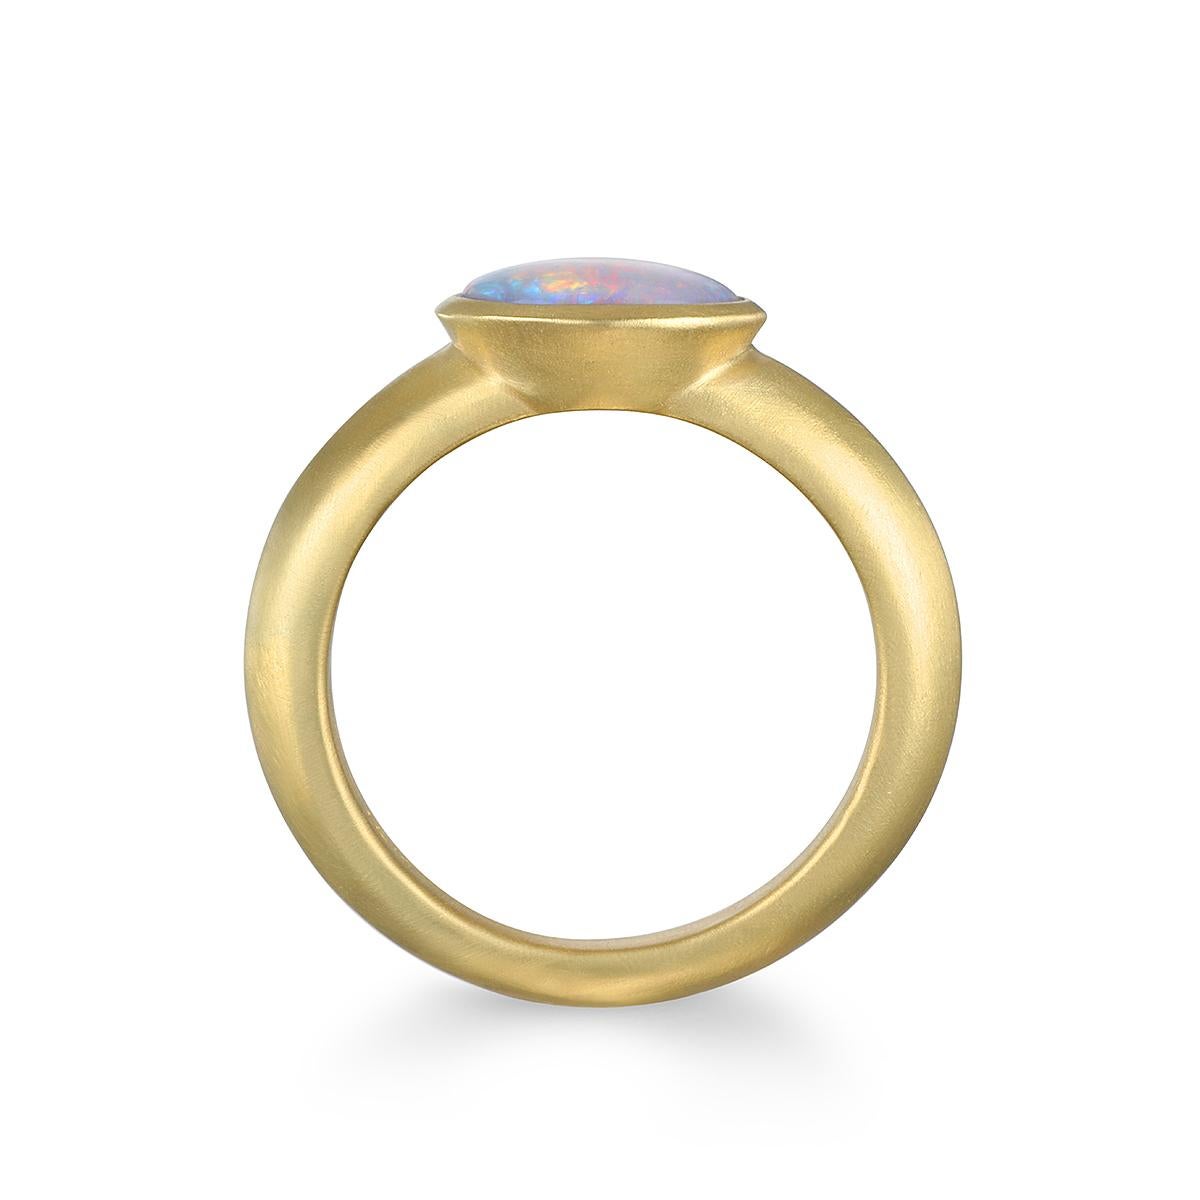 Faye Kim's one-of-a-kind Australian Opal is set in a matte finished 18 karat gold bezel. The ring is striking worn alone or stacked with other rings, and is sure to be a conversation starter.

1.13 Carats
Size 7, can be resized
Bezel dimensions 10.6